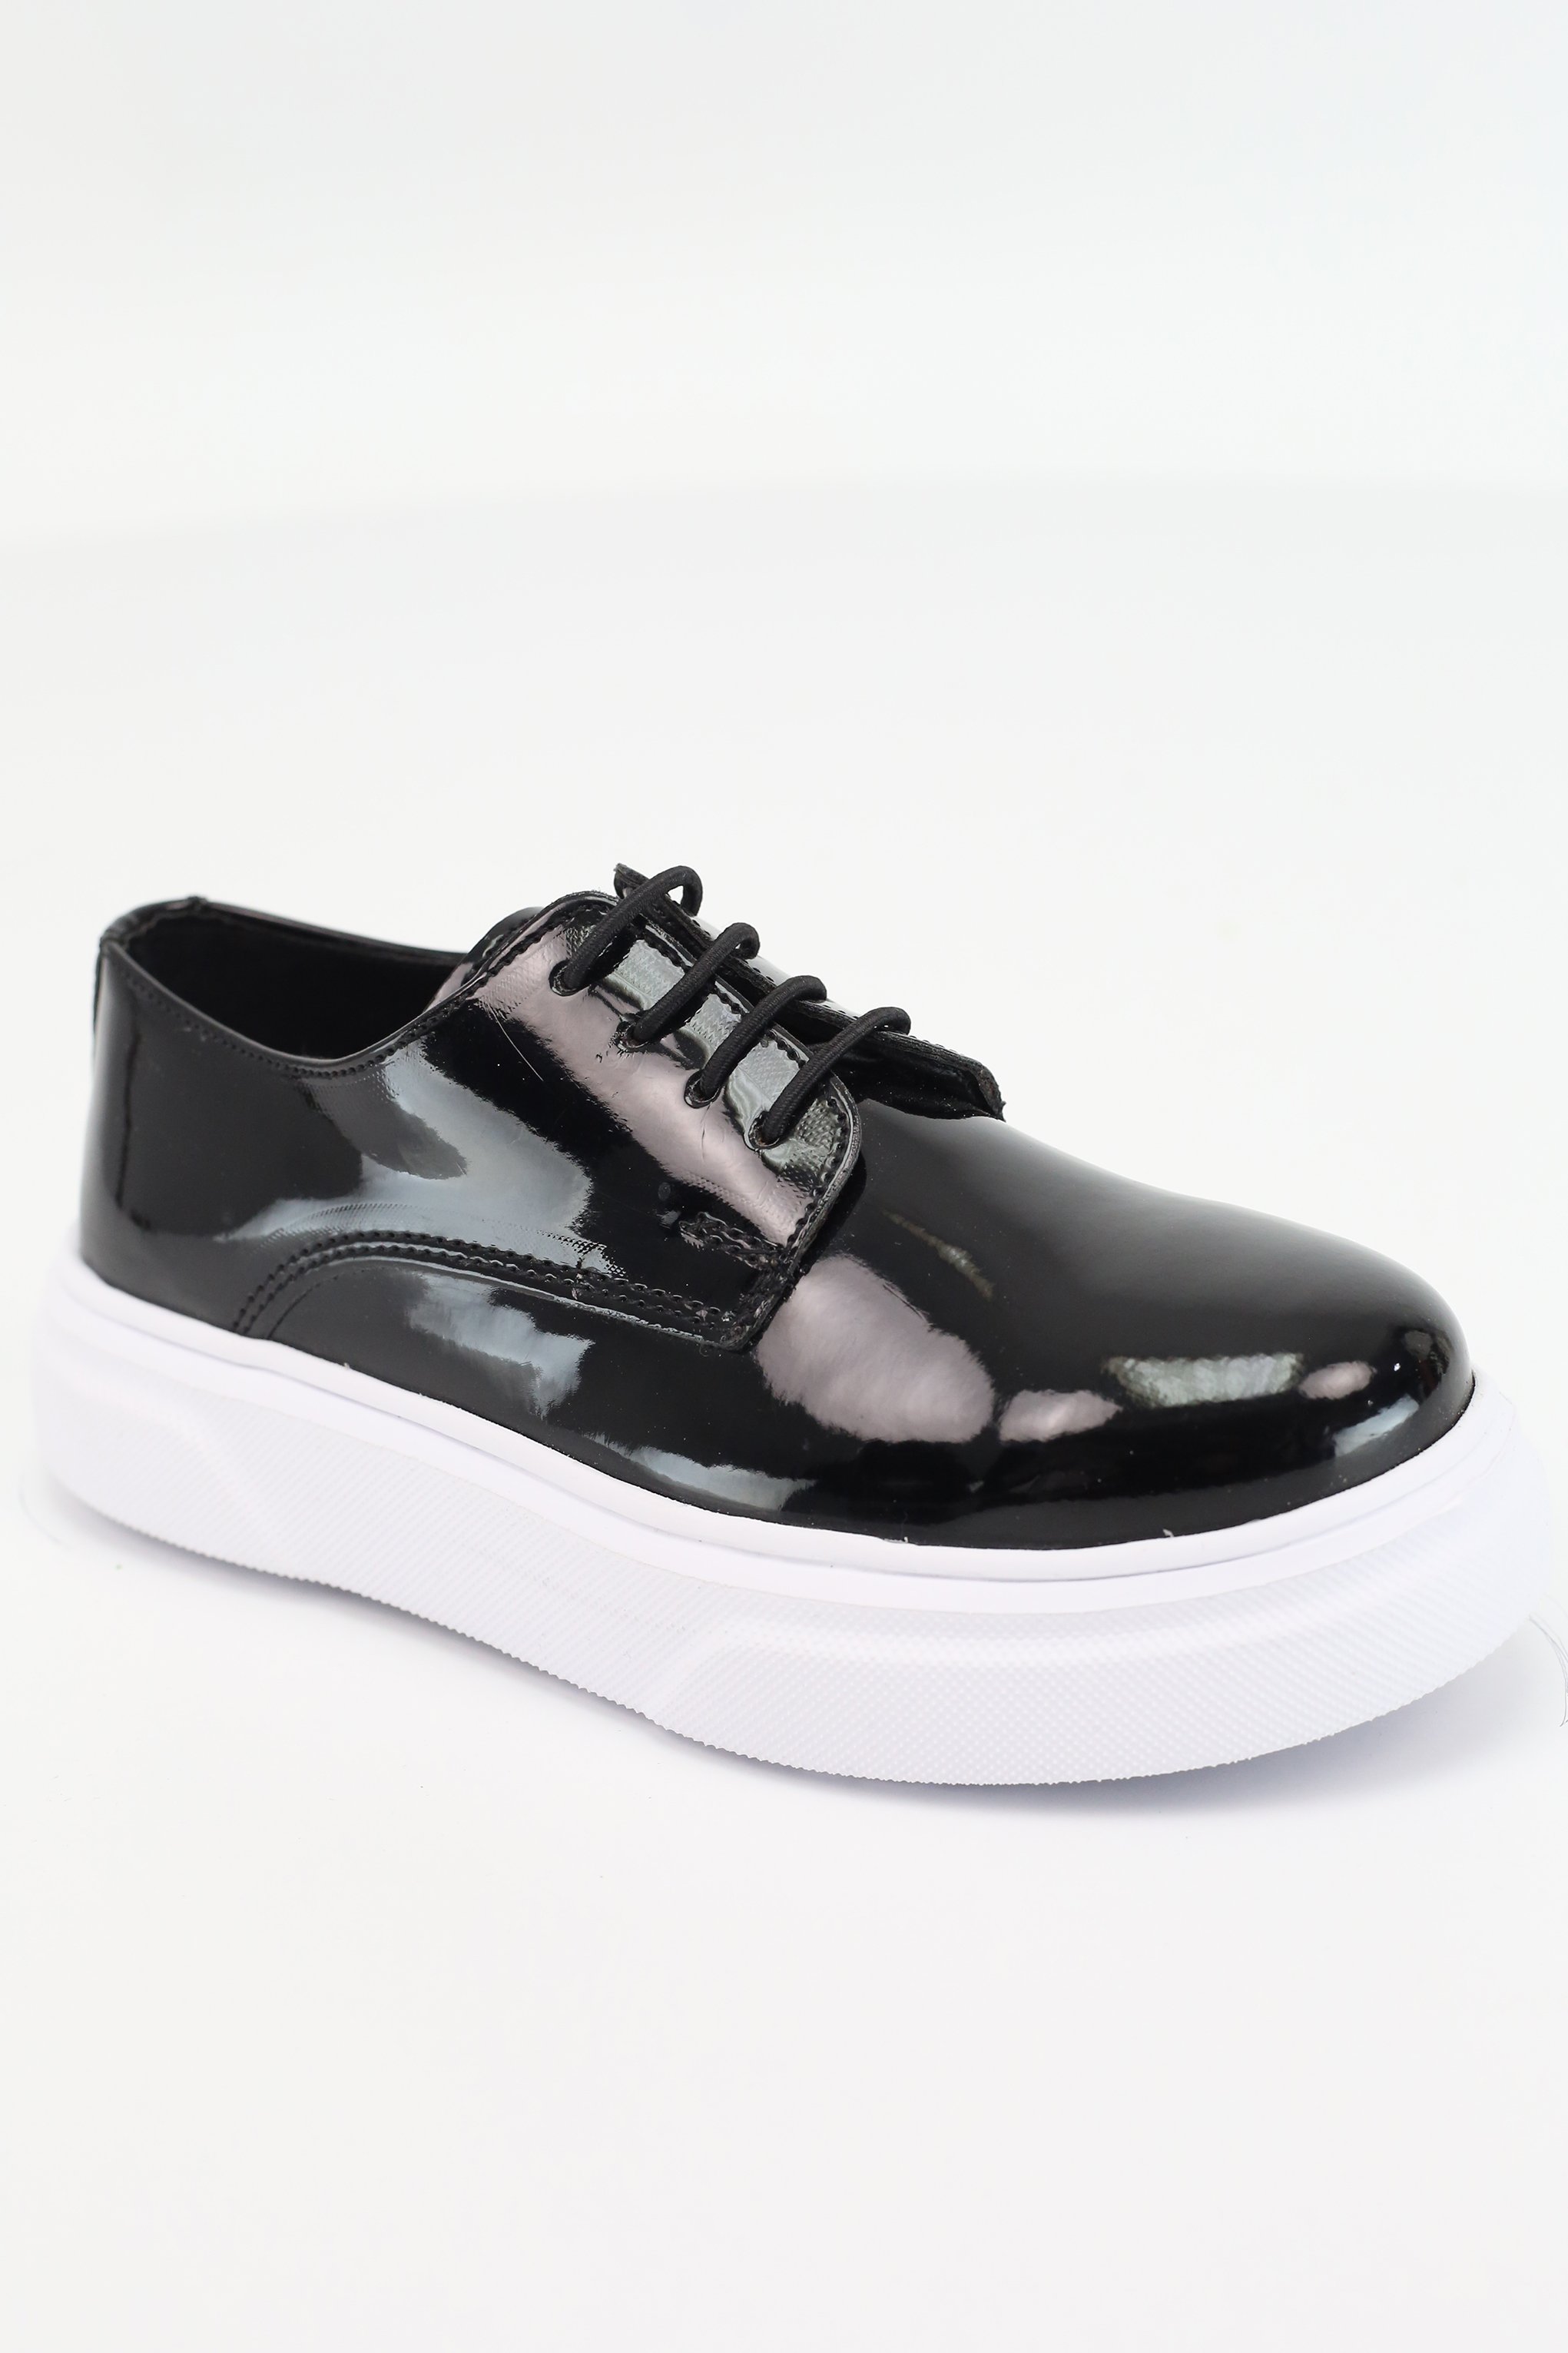 Boys Patent Black Lace-up Sneaker with White Thick Sole - Black